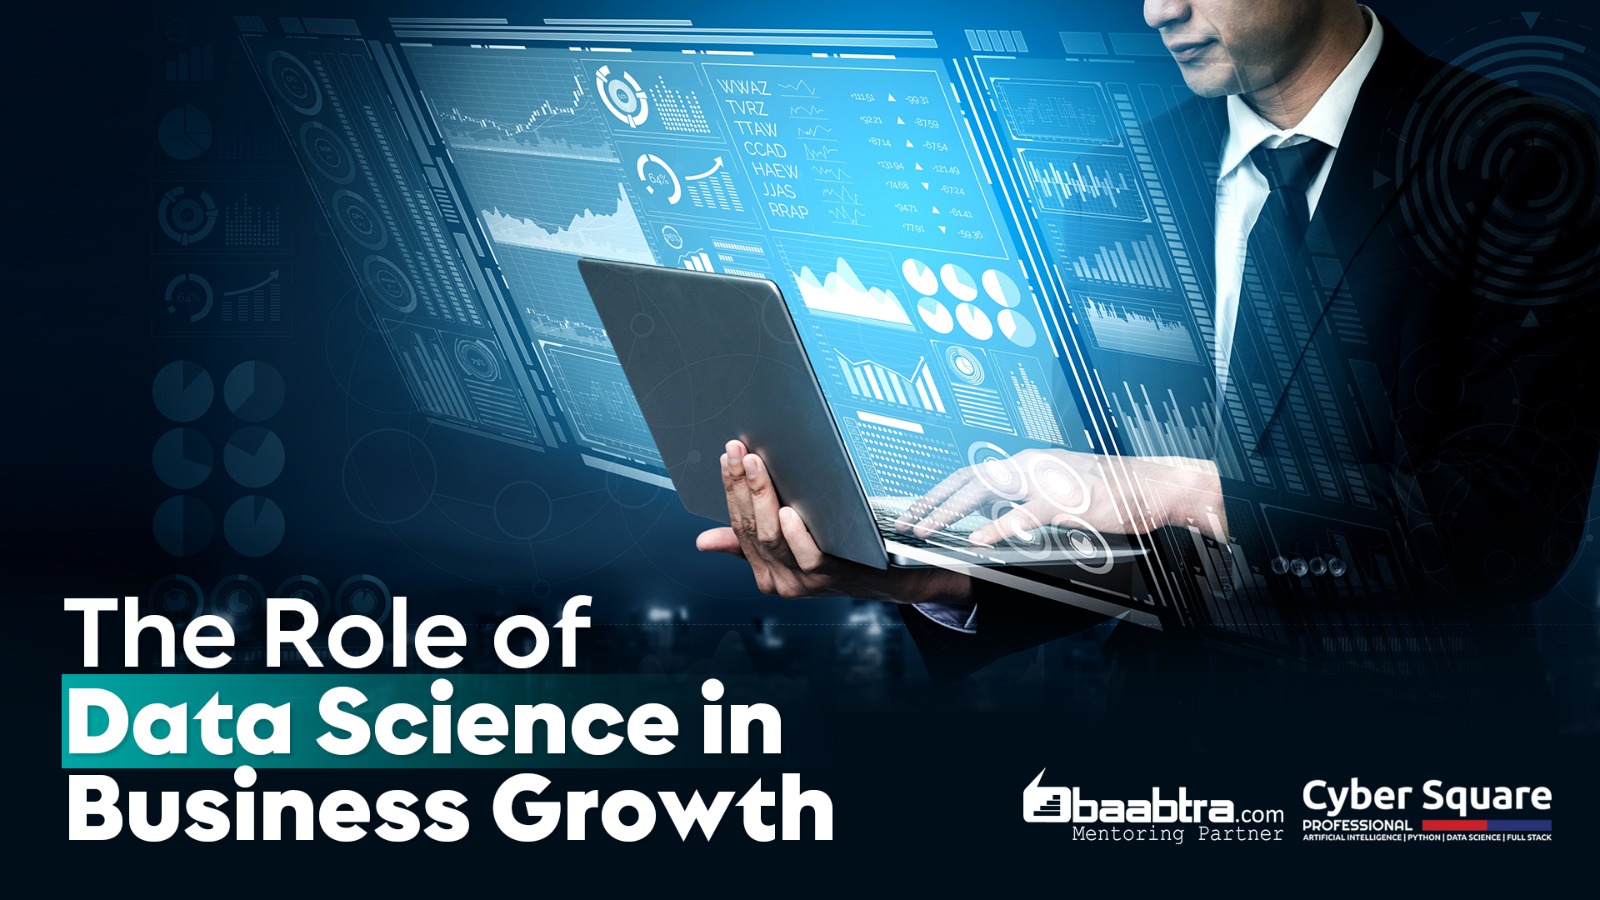 The Role of Data Science in Business Growth